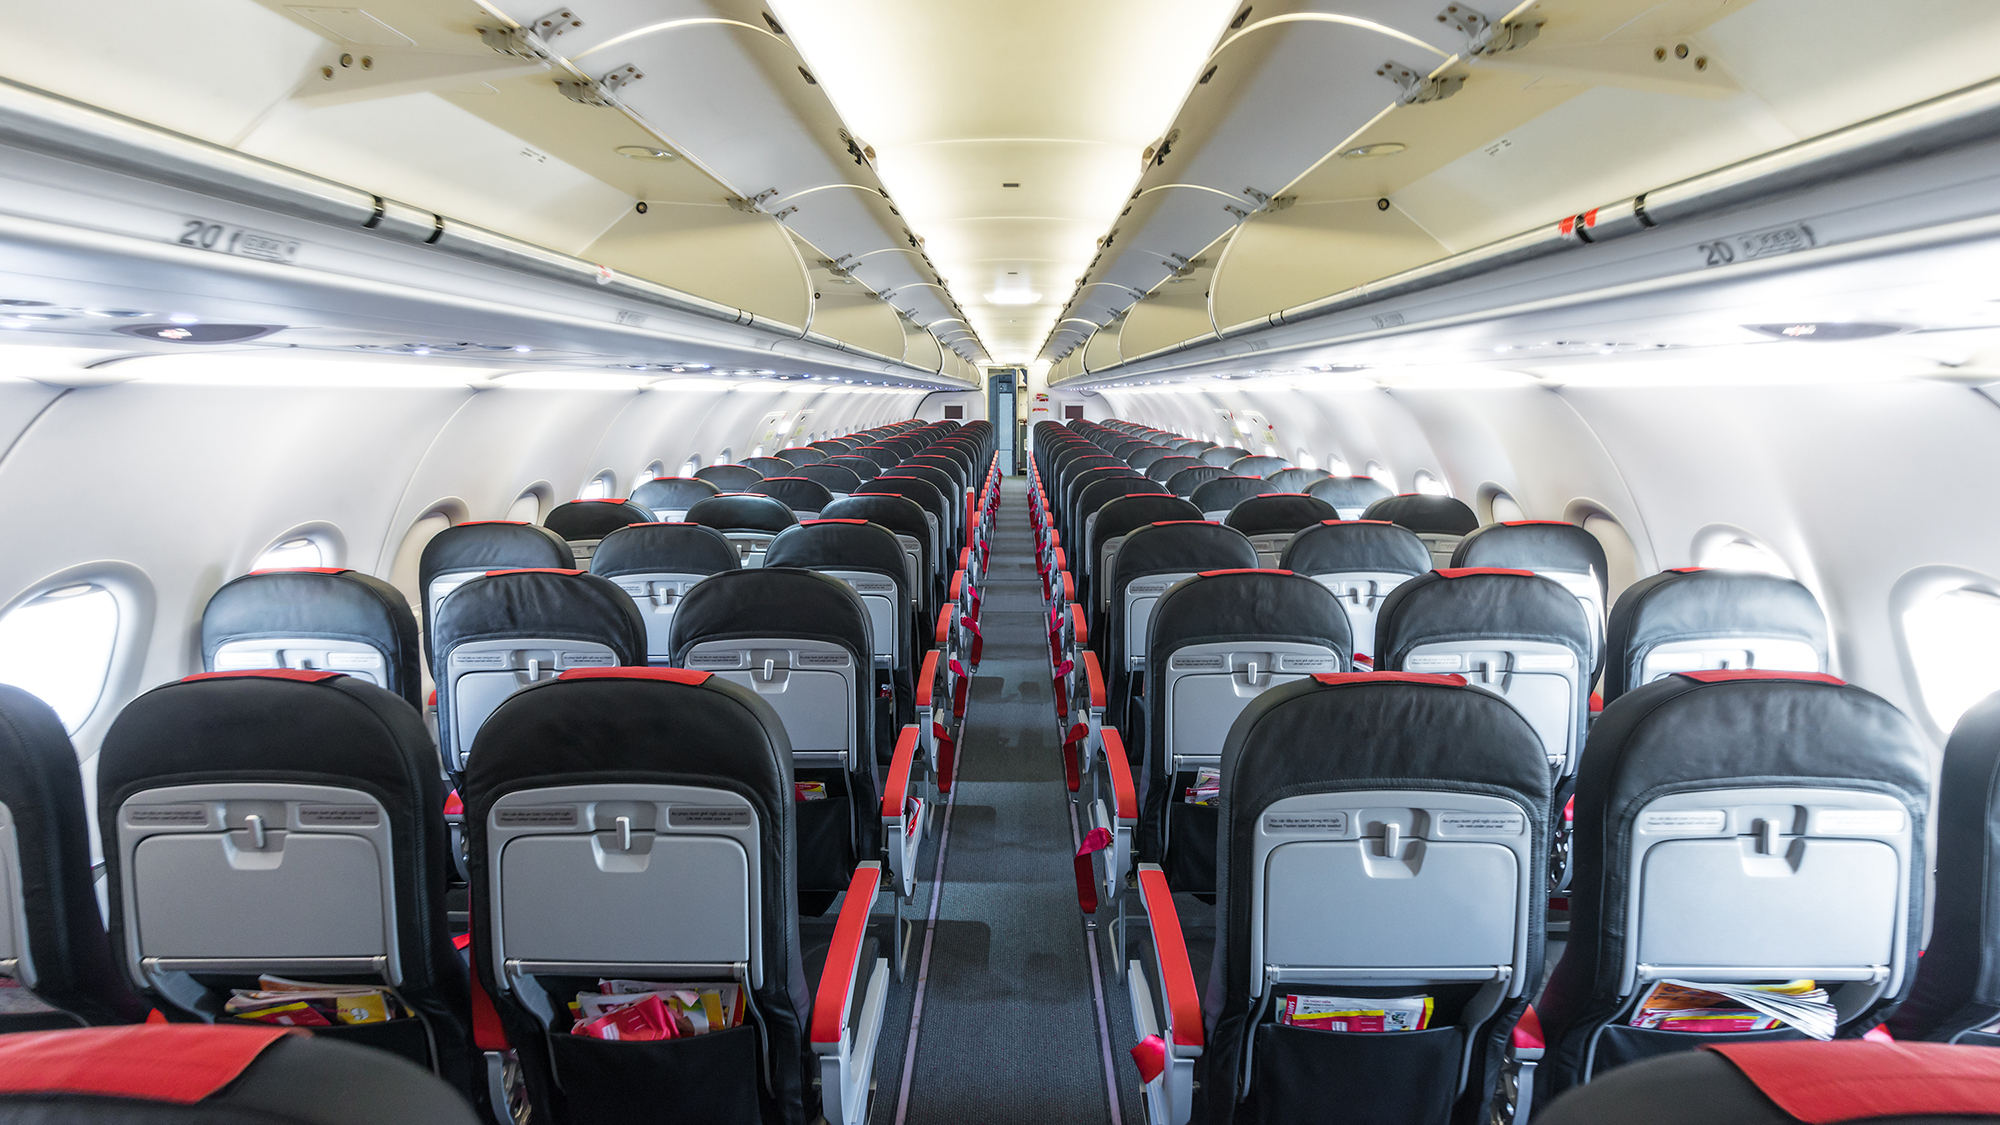 How to get the best airline seat